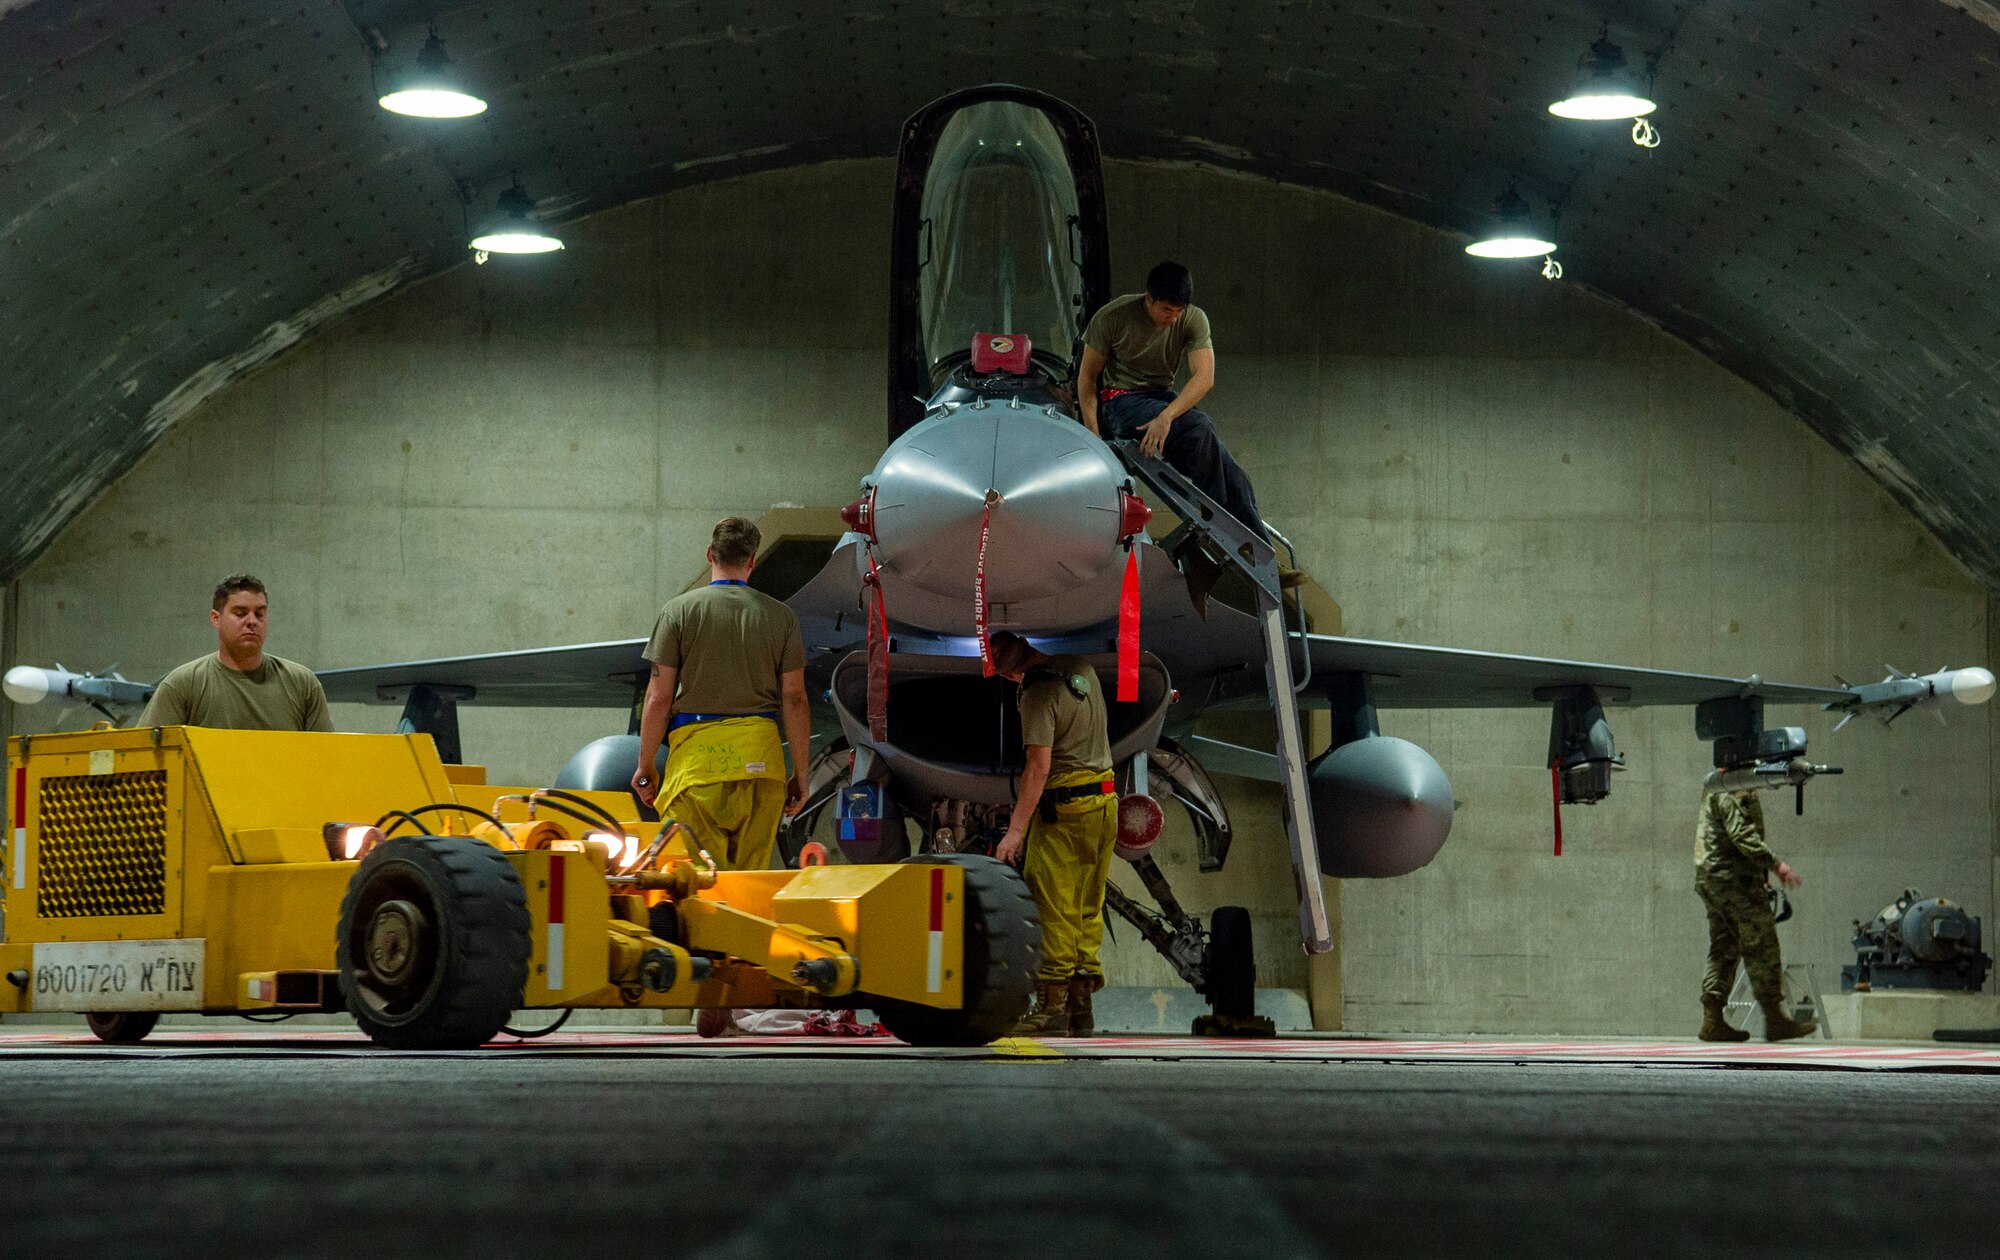 U.S. Air Force Airmen from the 52nd Aircraft Maintenance Squadron, perform post flight maintenance on an F-16 Fighting Falcon during Blue Flag 2019 at Uvda Air Base, Israel, November 6, 2019.